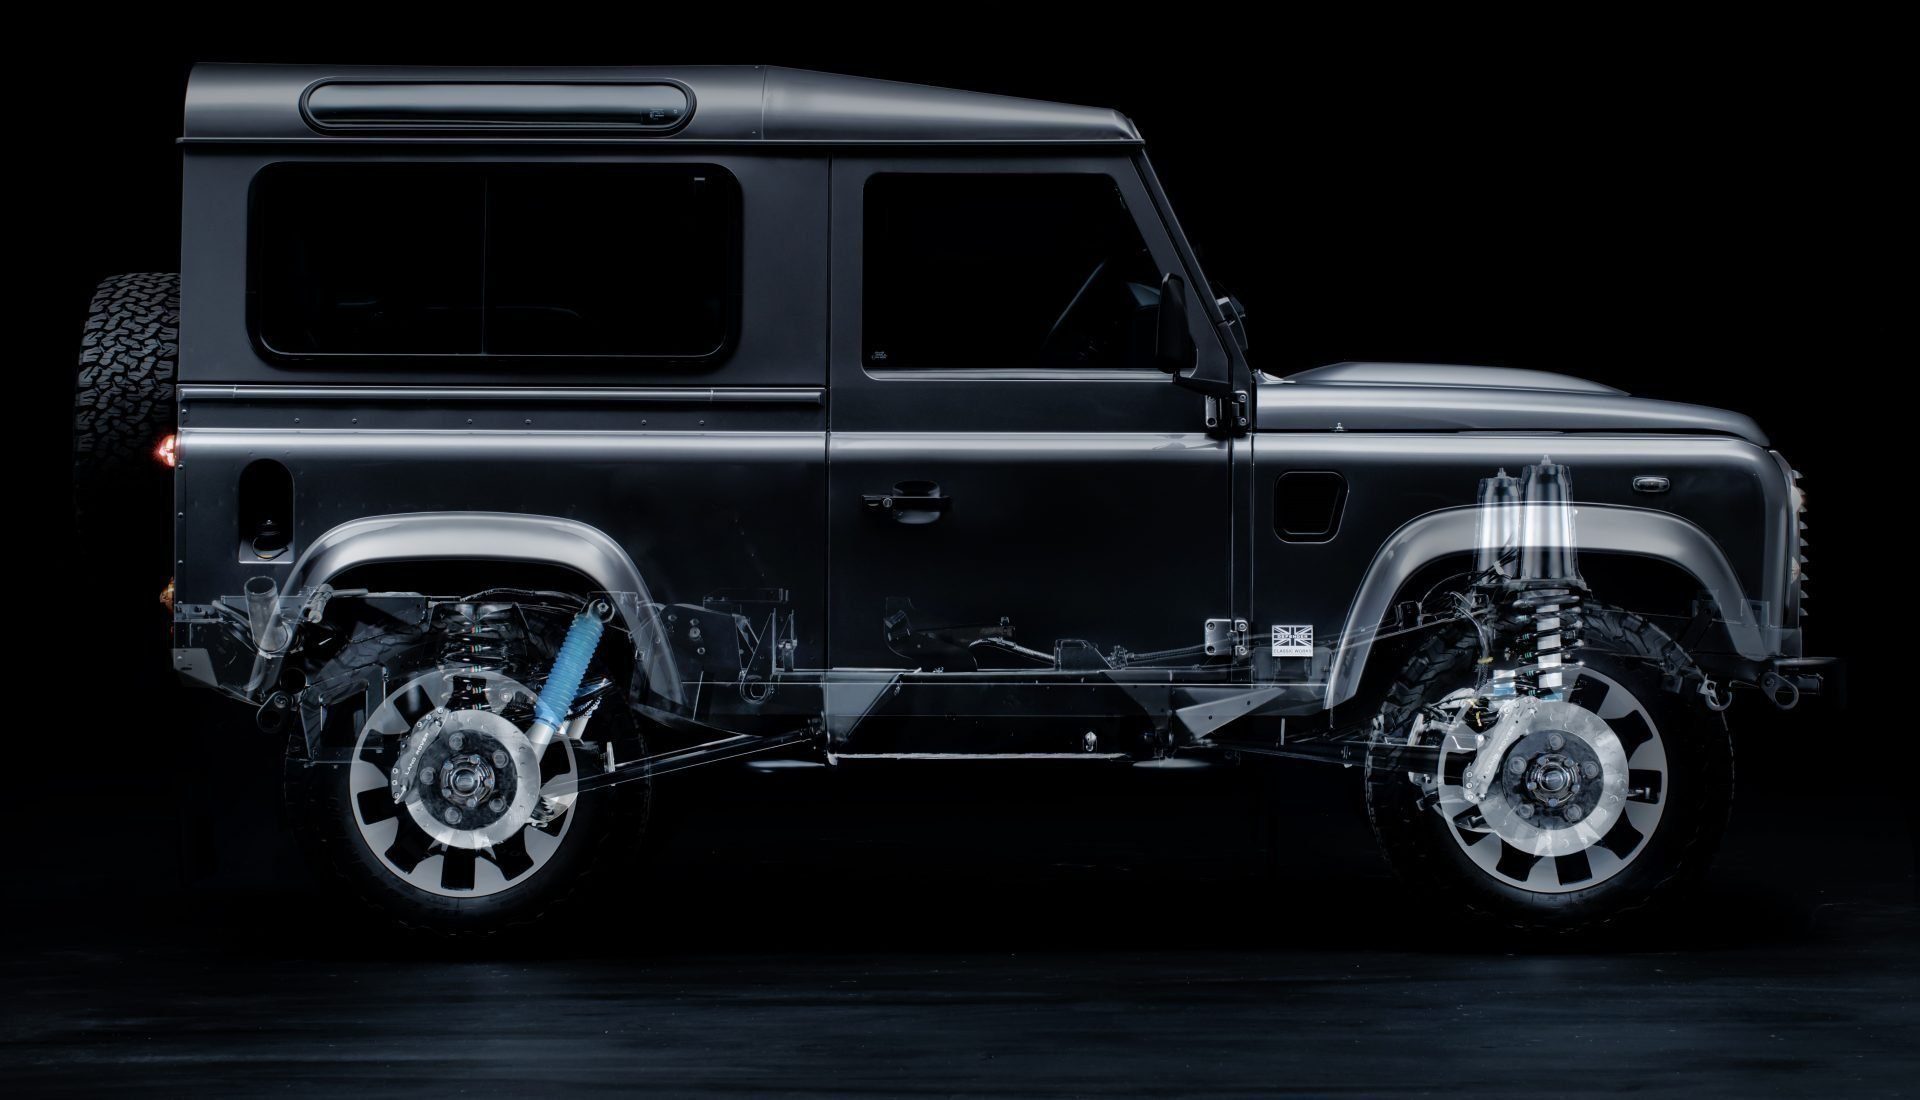 Land Rover Classic Adds Brake and Other Upgrades to Defender Models